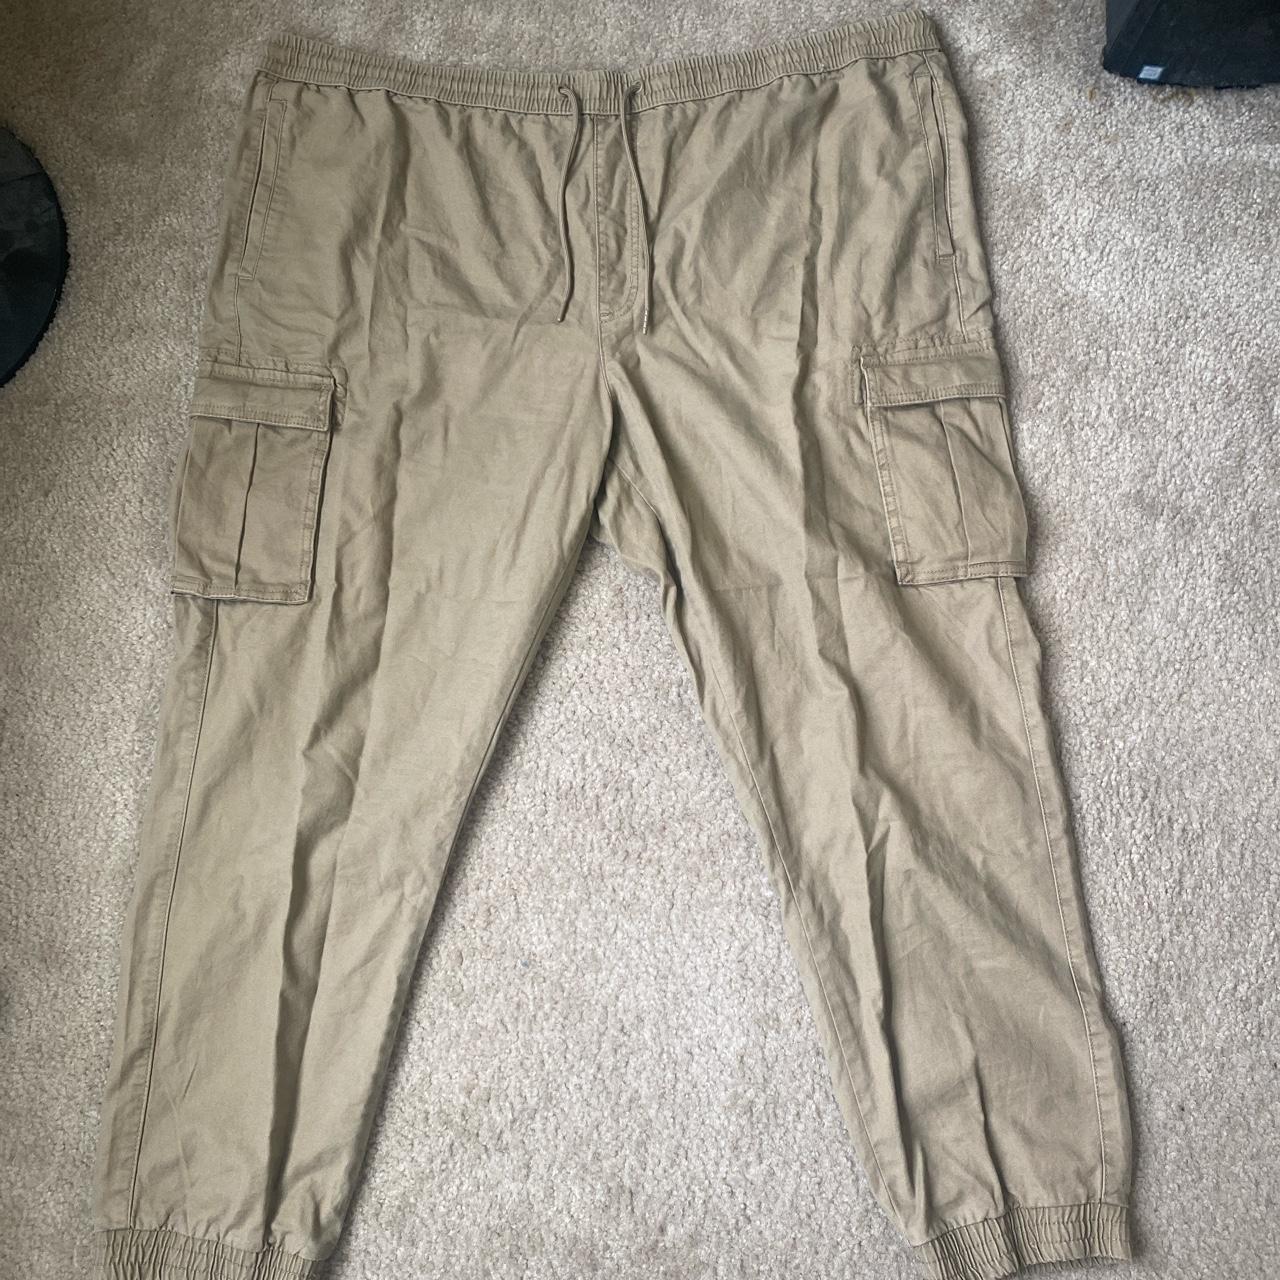 Goodfellow cotton cargo joggers size 2XL. these have... - Depop